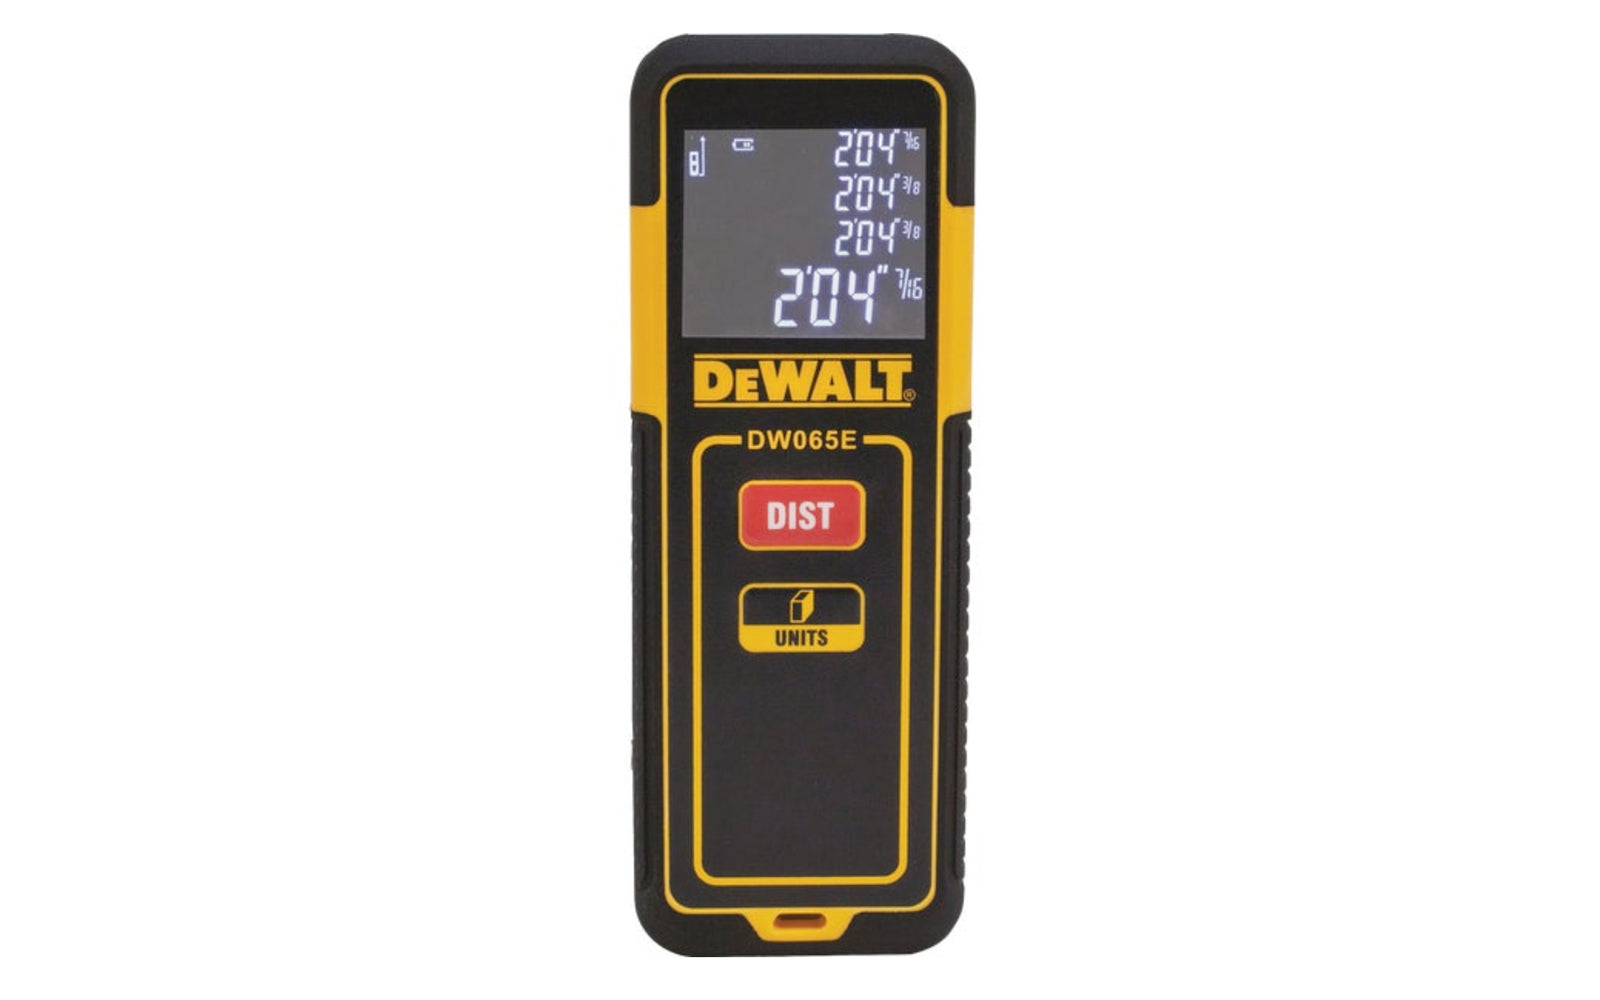 DeWalt 65' Range Laser Distance Measurer. This is a versatile, compact laser distance measurer that allows you to measure up to 65 Ft. Calculate area and volume with a click of a button and refer back to your last 3 measurements for added convenience. Model DW065E.